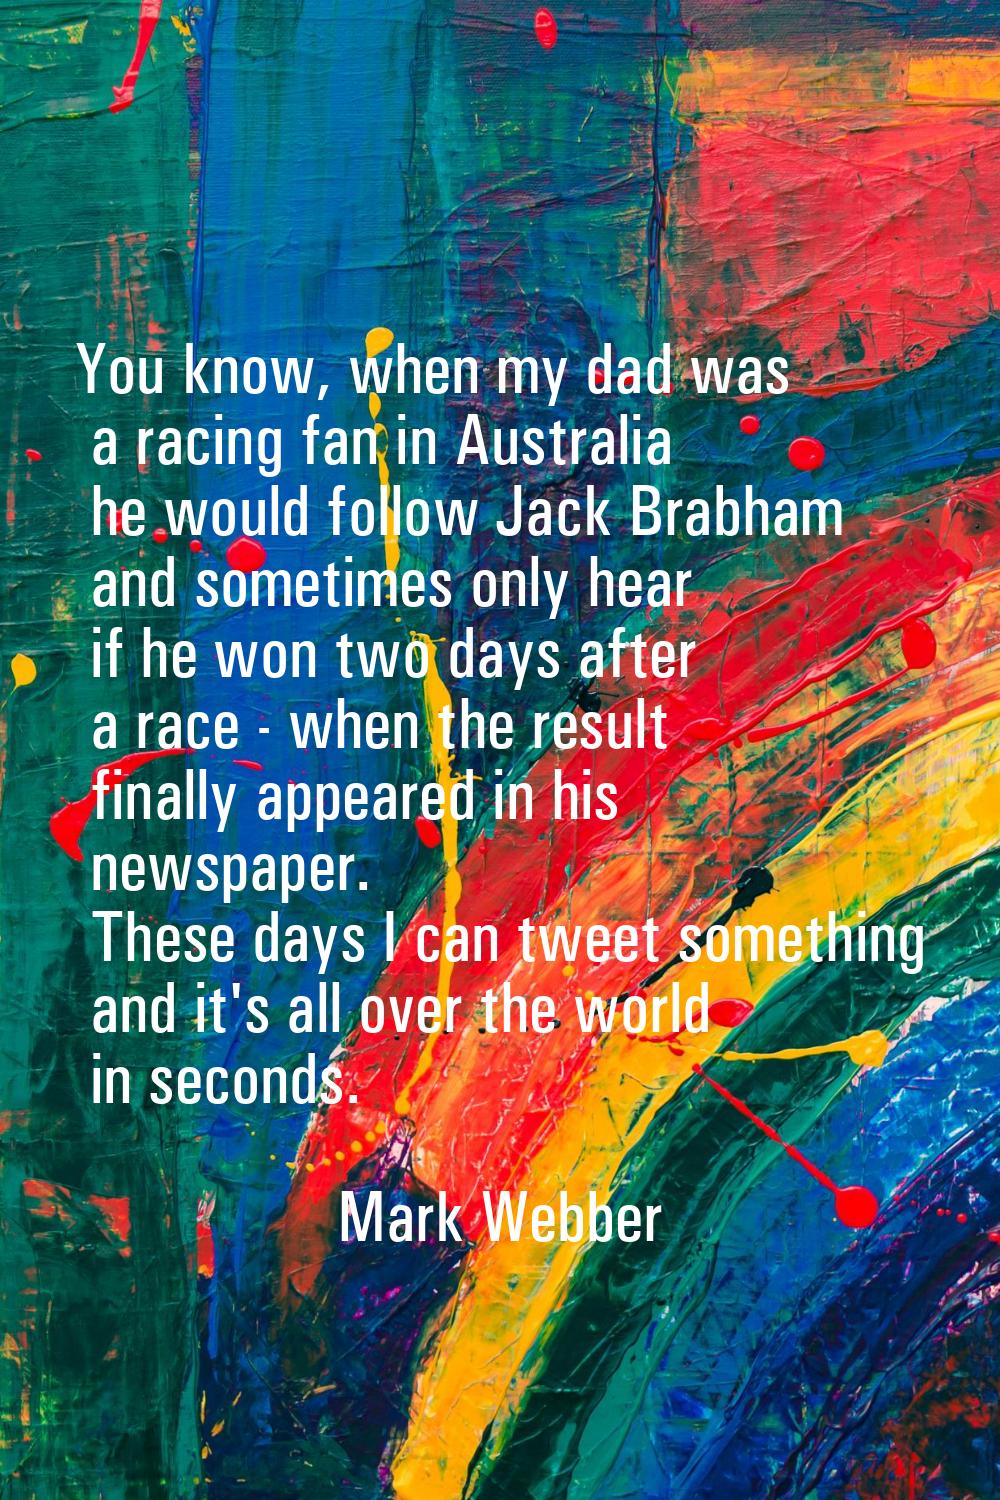 You know, when my dad was a racing fan in Australia he would follow Jack Brabham and sometimes only